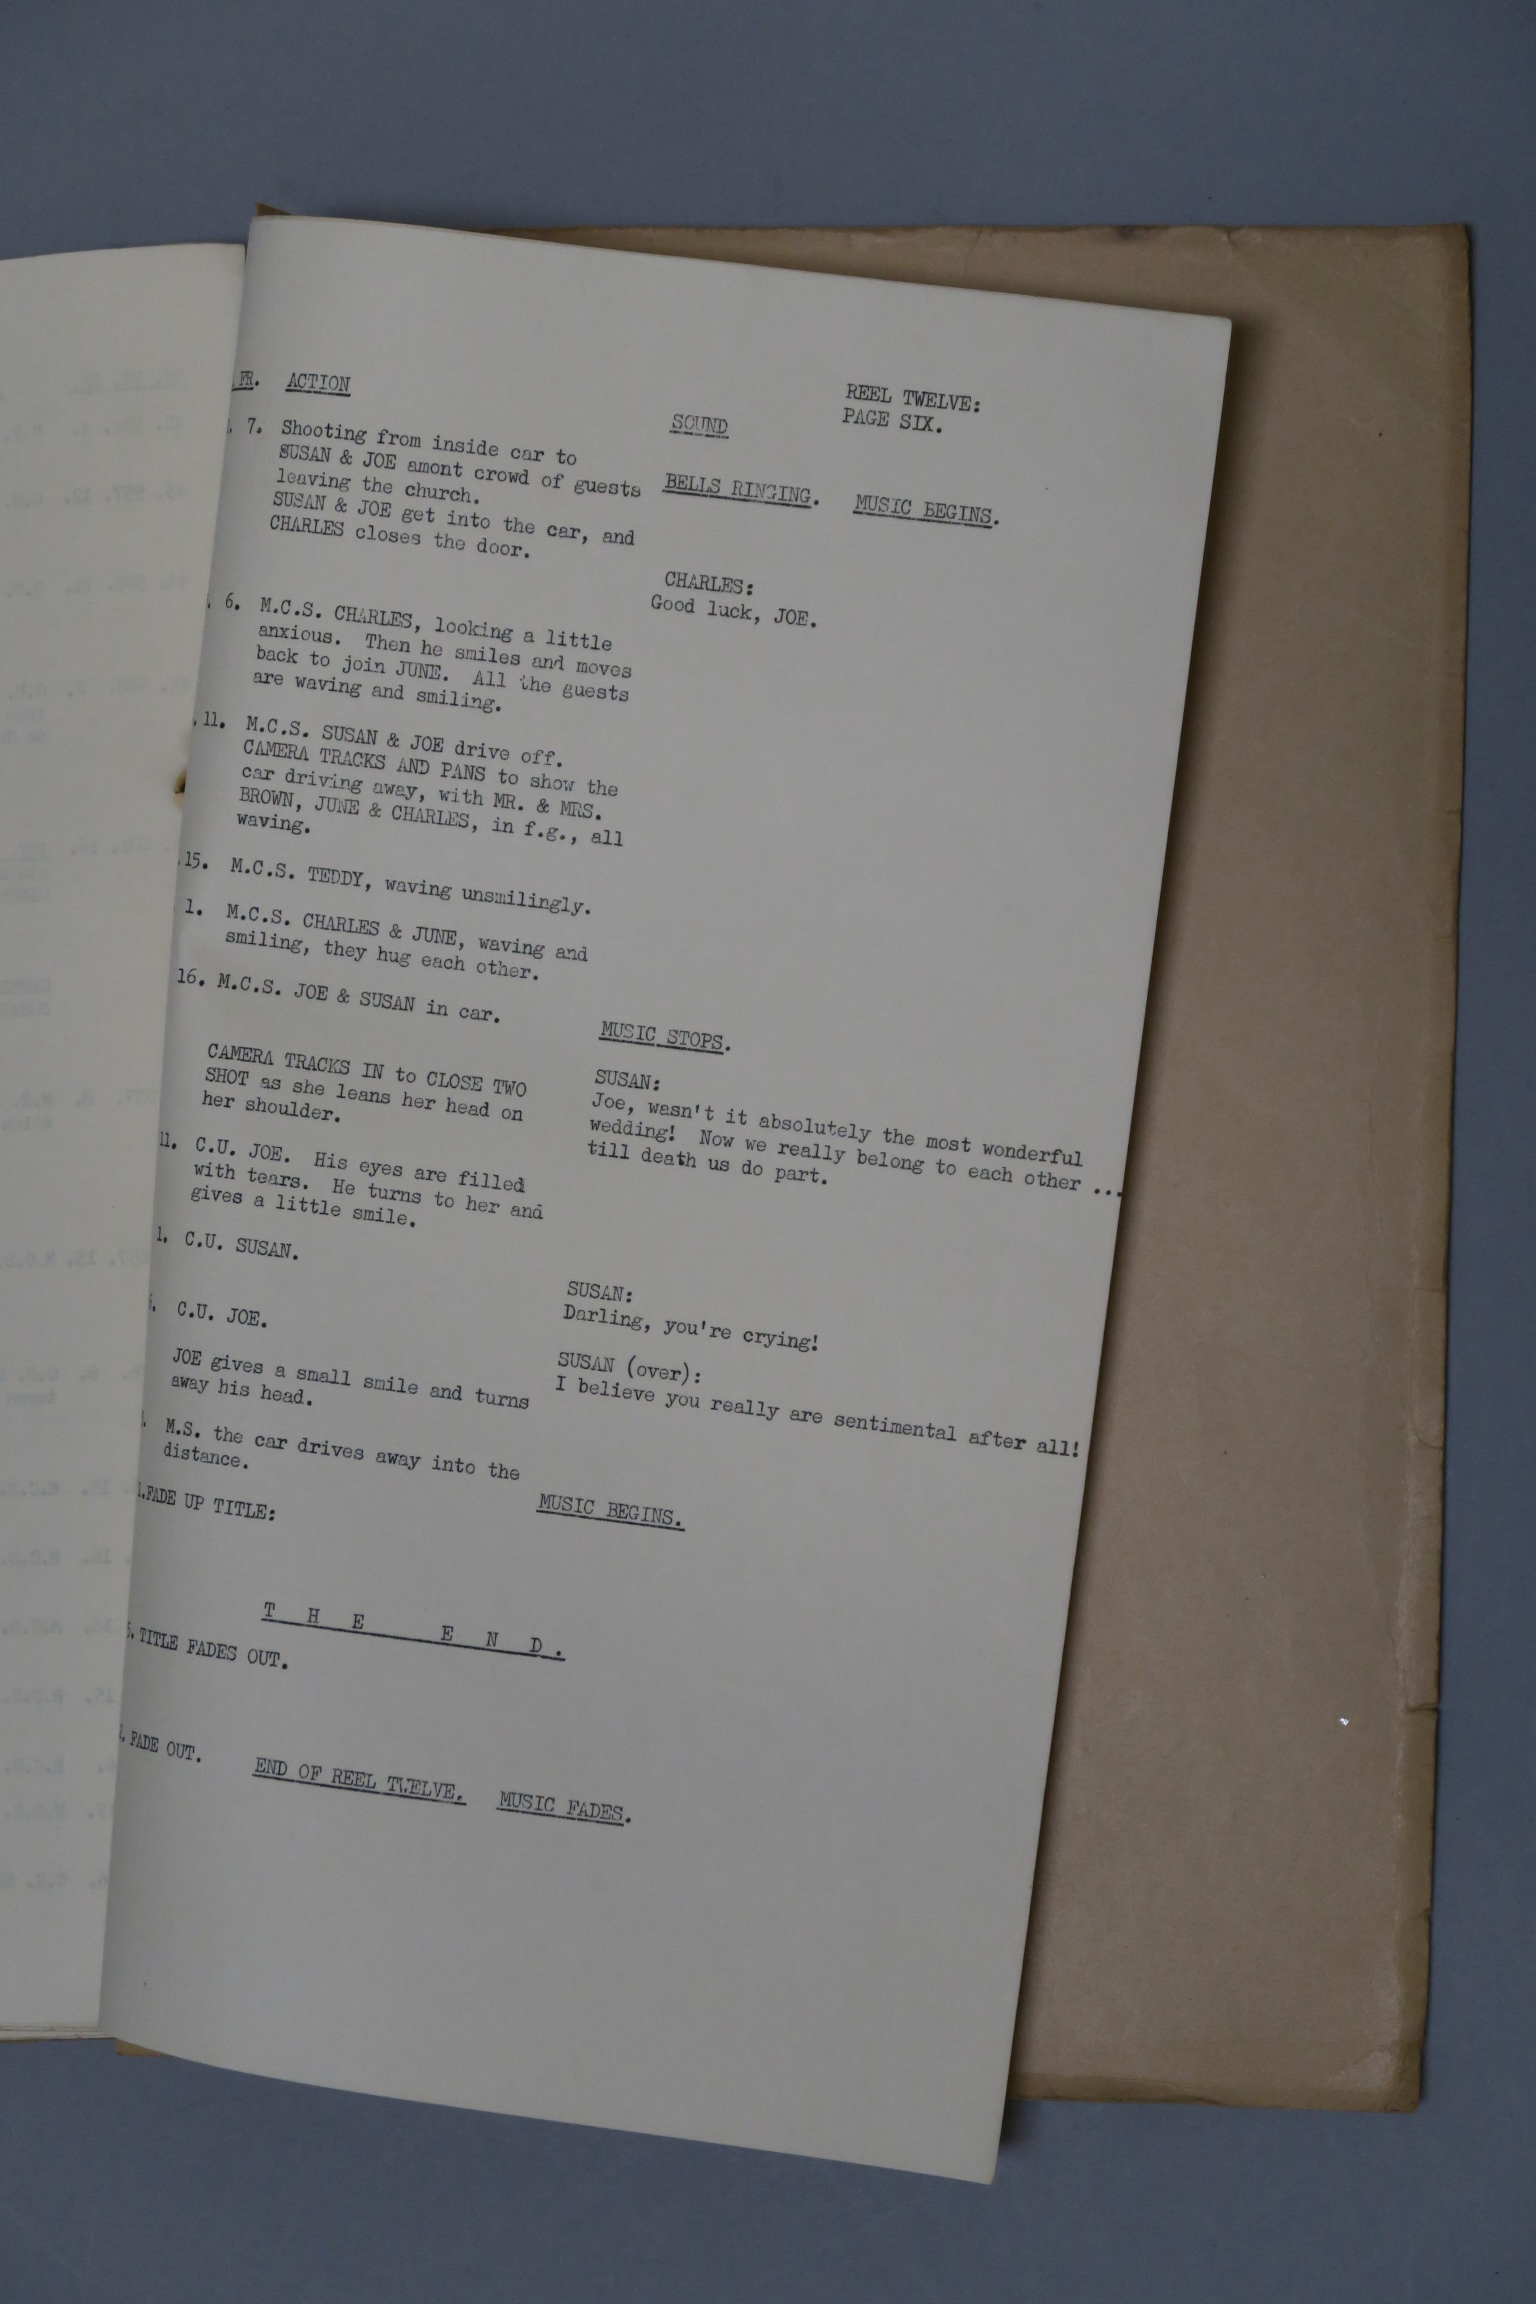 "Room at the Top" (1959) Oscar winning Screenplay Release Script belonging to Neil Paterson who won - Image 5 of 6